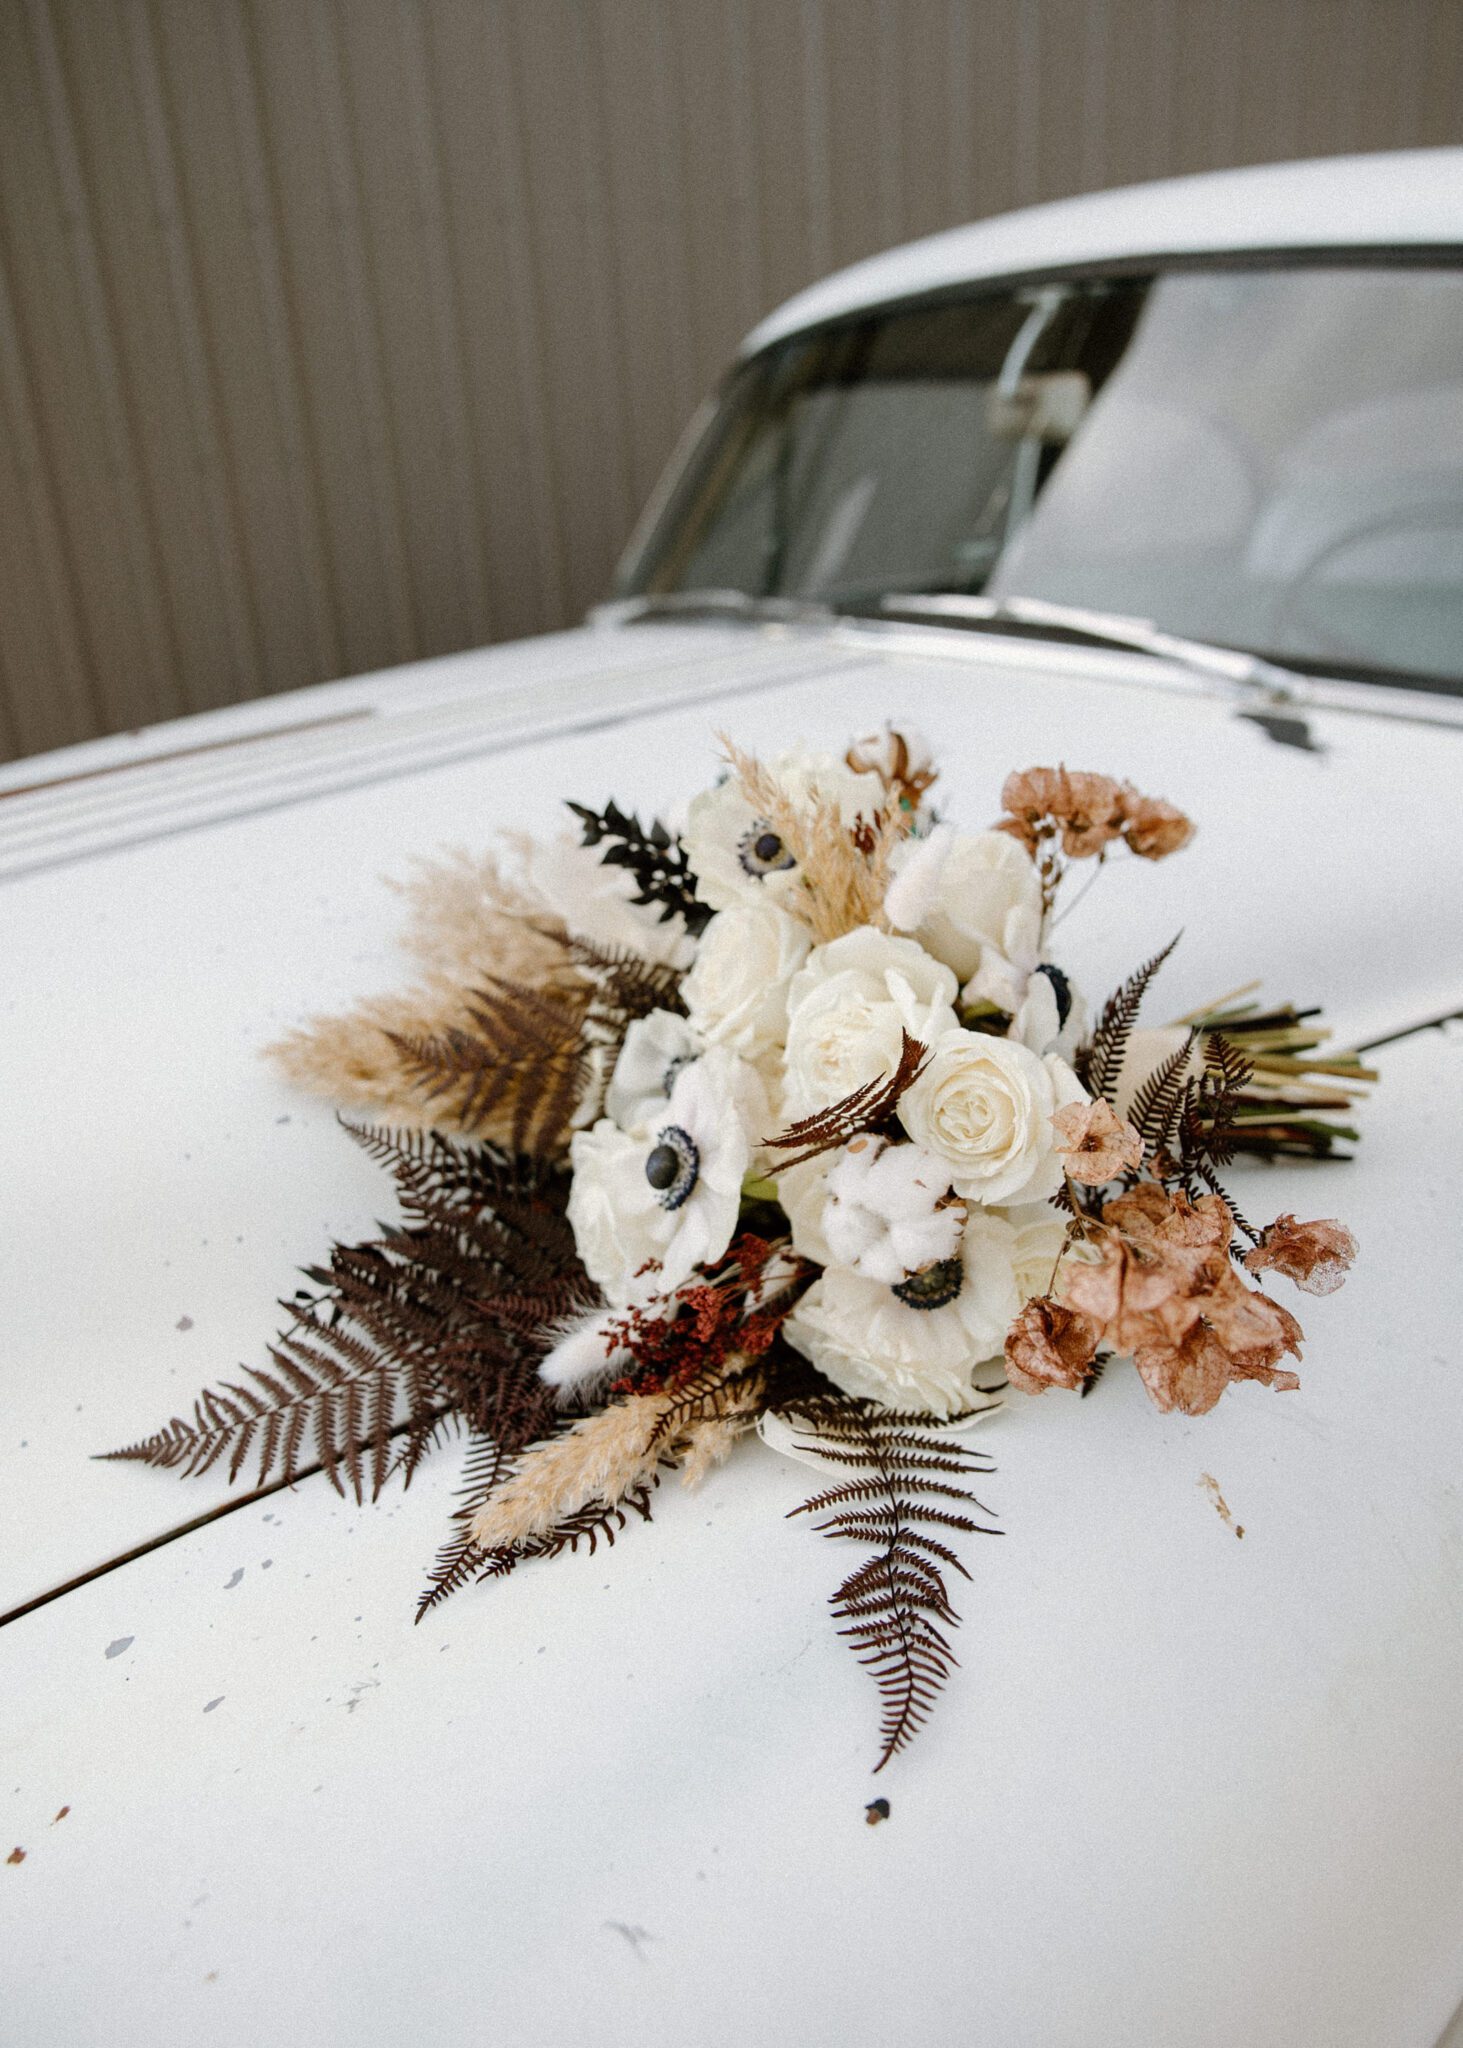 Detail photo of the bride's wedding bouquet with textured dried florals and rich tones, laying on top of the vintage getaway car.